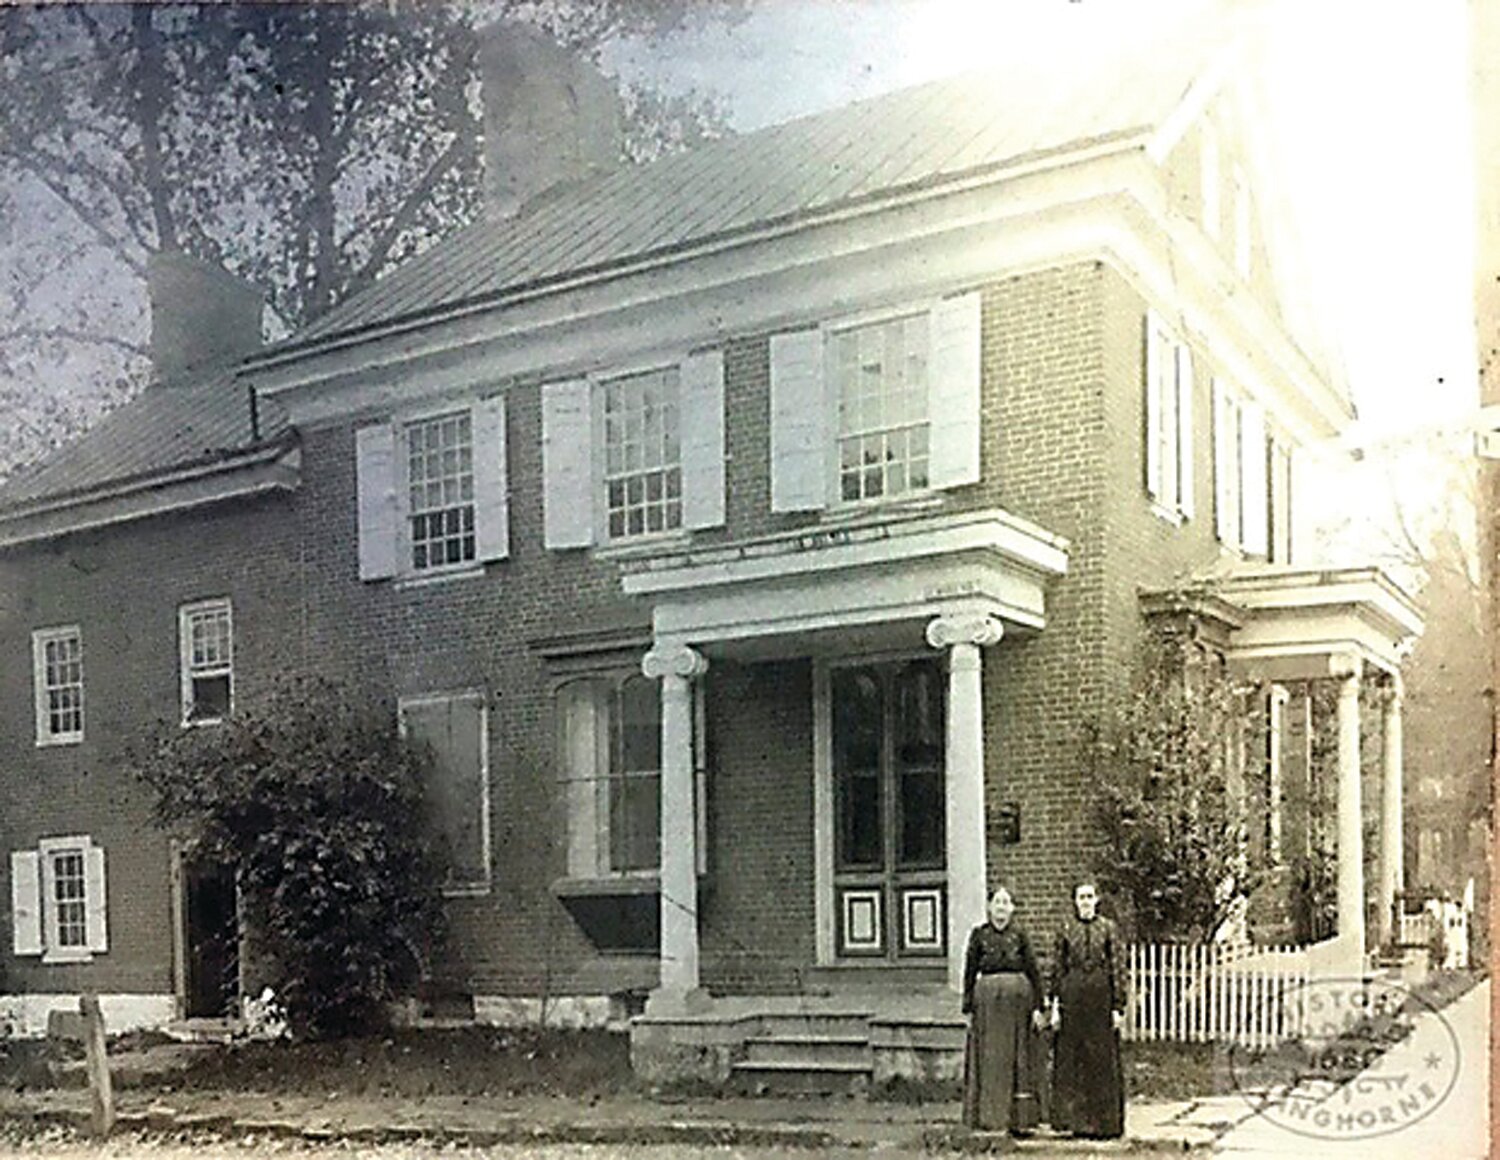 Taken sometime around 1905, this is the Historic Langhorne Association’s earliest photo of the Gilbert Hicks House. By 1905, the house was already nearly 150 years old. Today the building is home to Langhorne Coffee House.